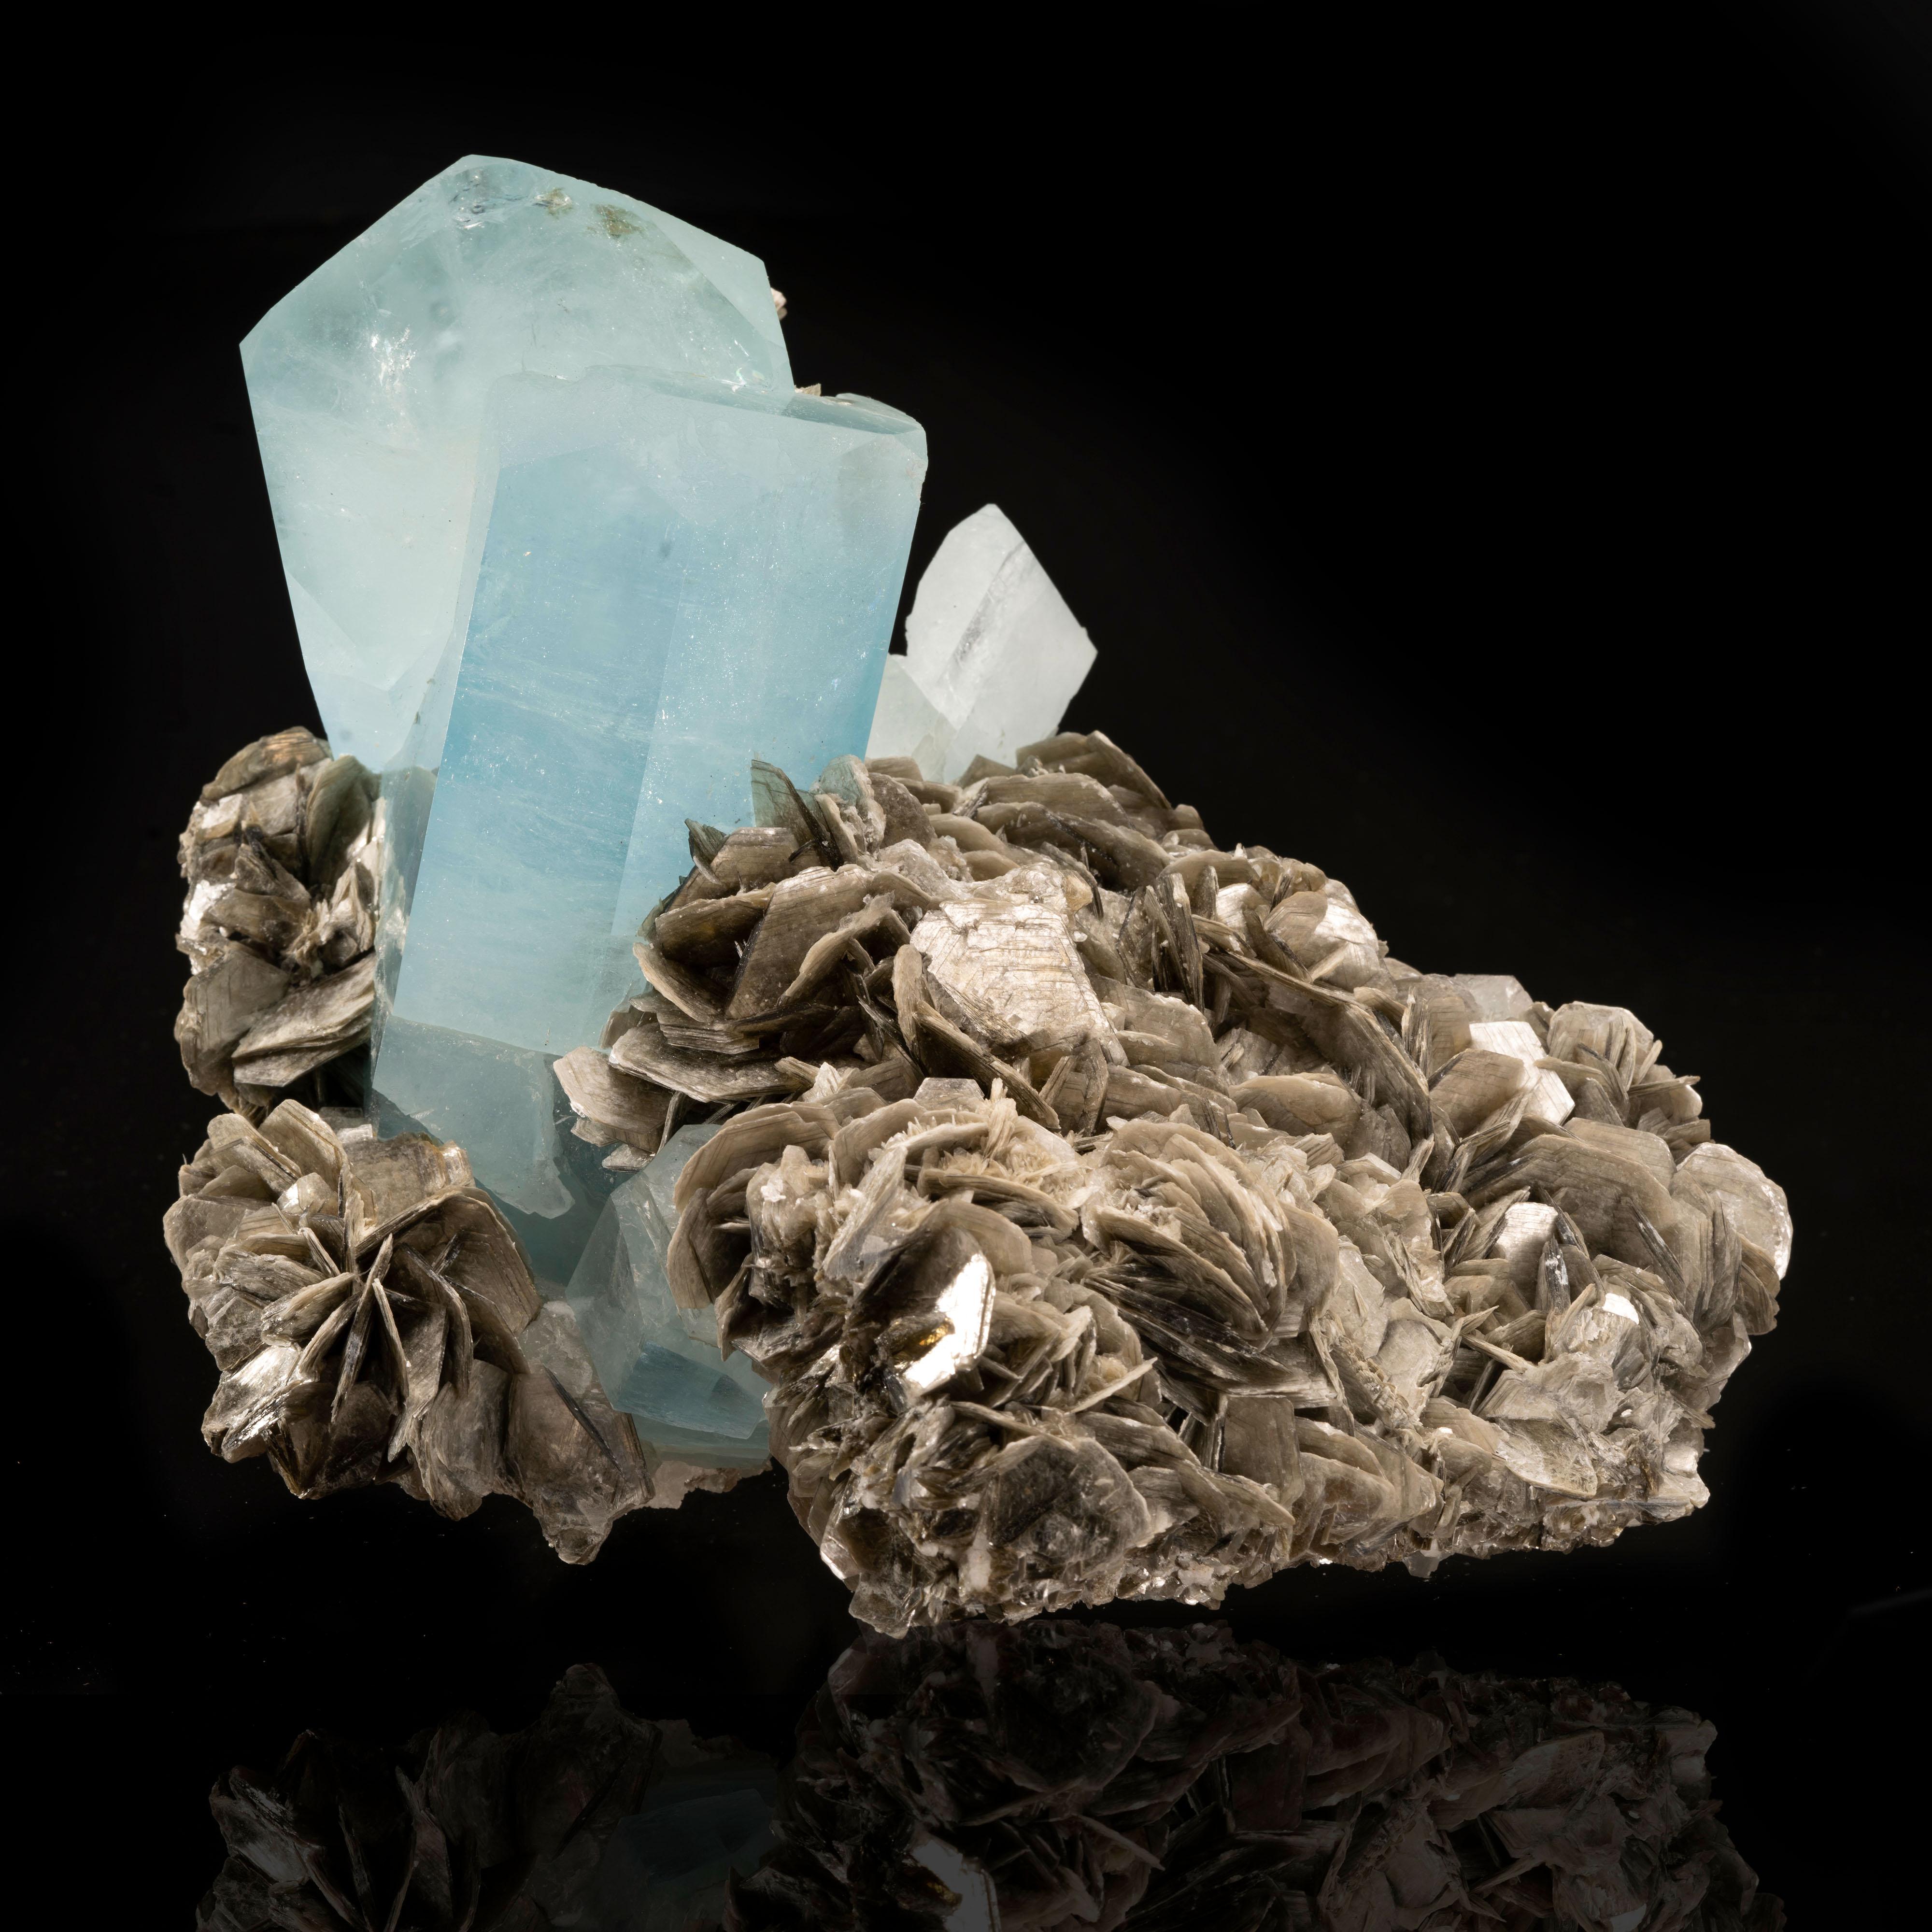 This 6.5 pound cluster of huge, glassy, damage-free aquamarine crystals with lovely color out of Nagar, Pakistan is embedded in a generous mound of lustrous, floral muscovite for a fascinating juxtaposition of textures. The largest two crystals are